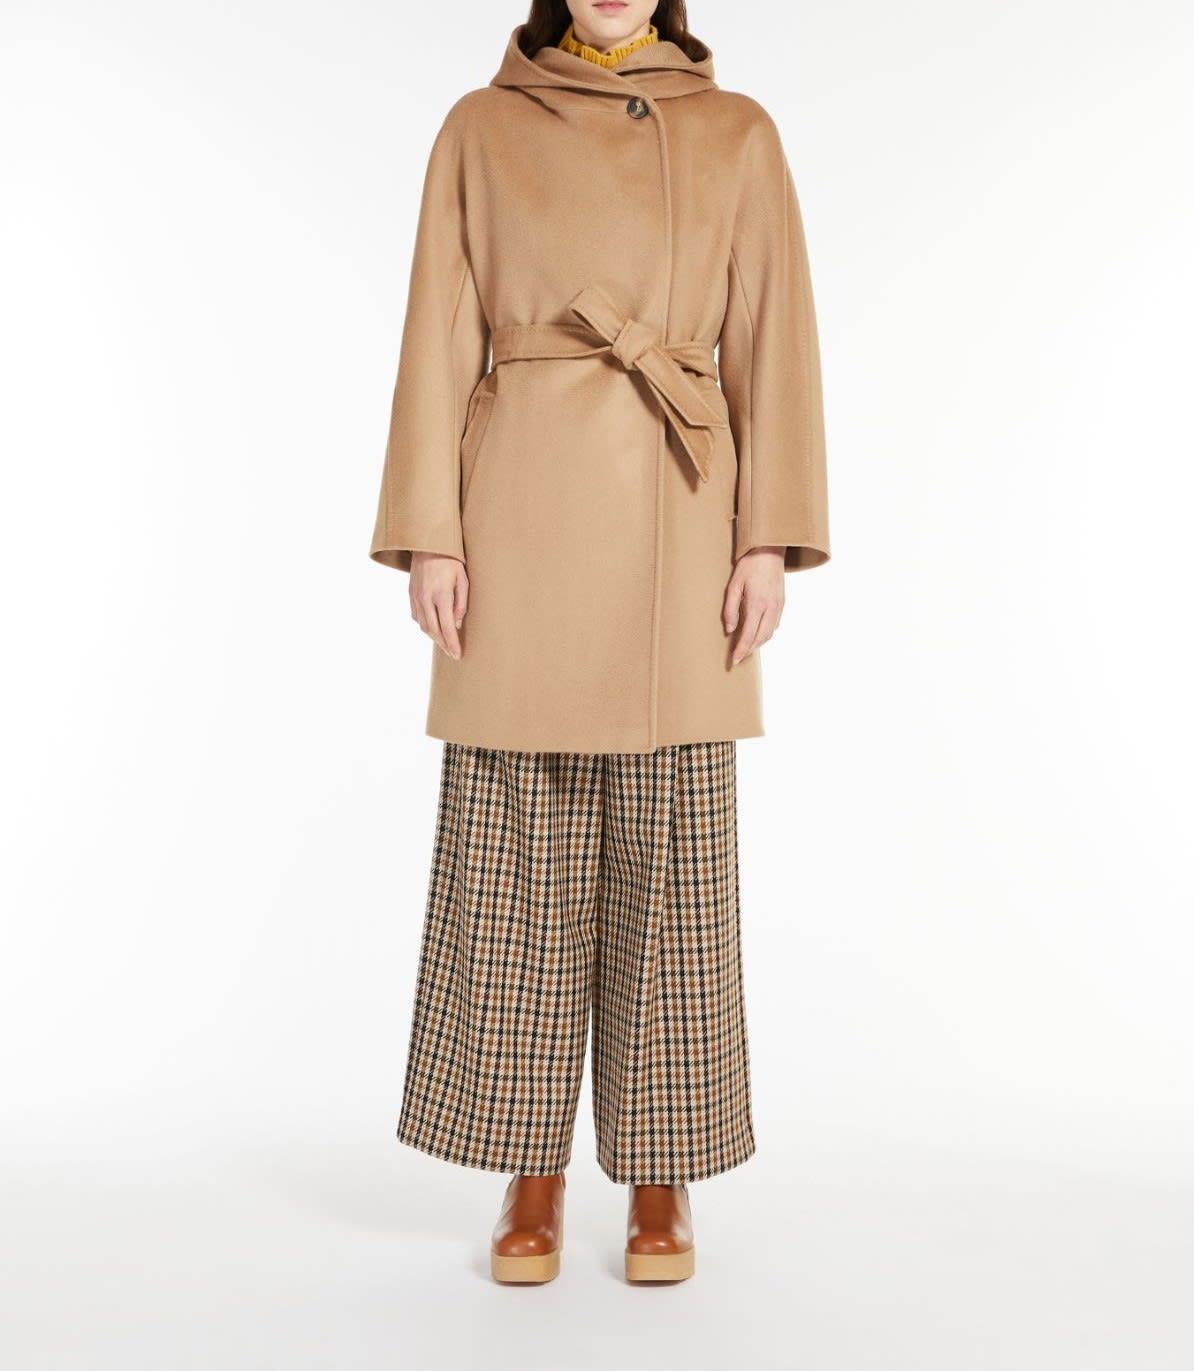 Weekend by Maxmara Other Materials Coat in Natural | Lyst